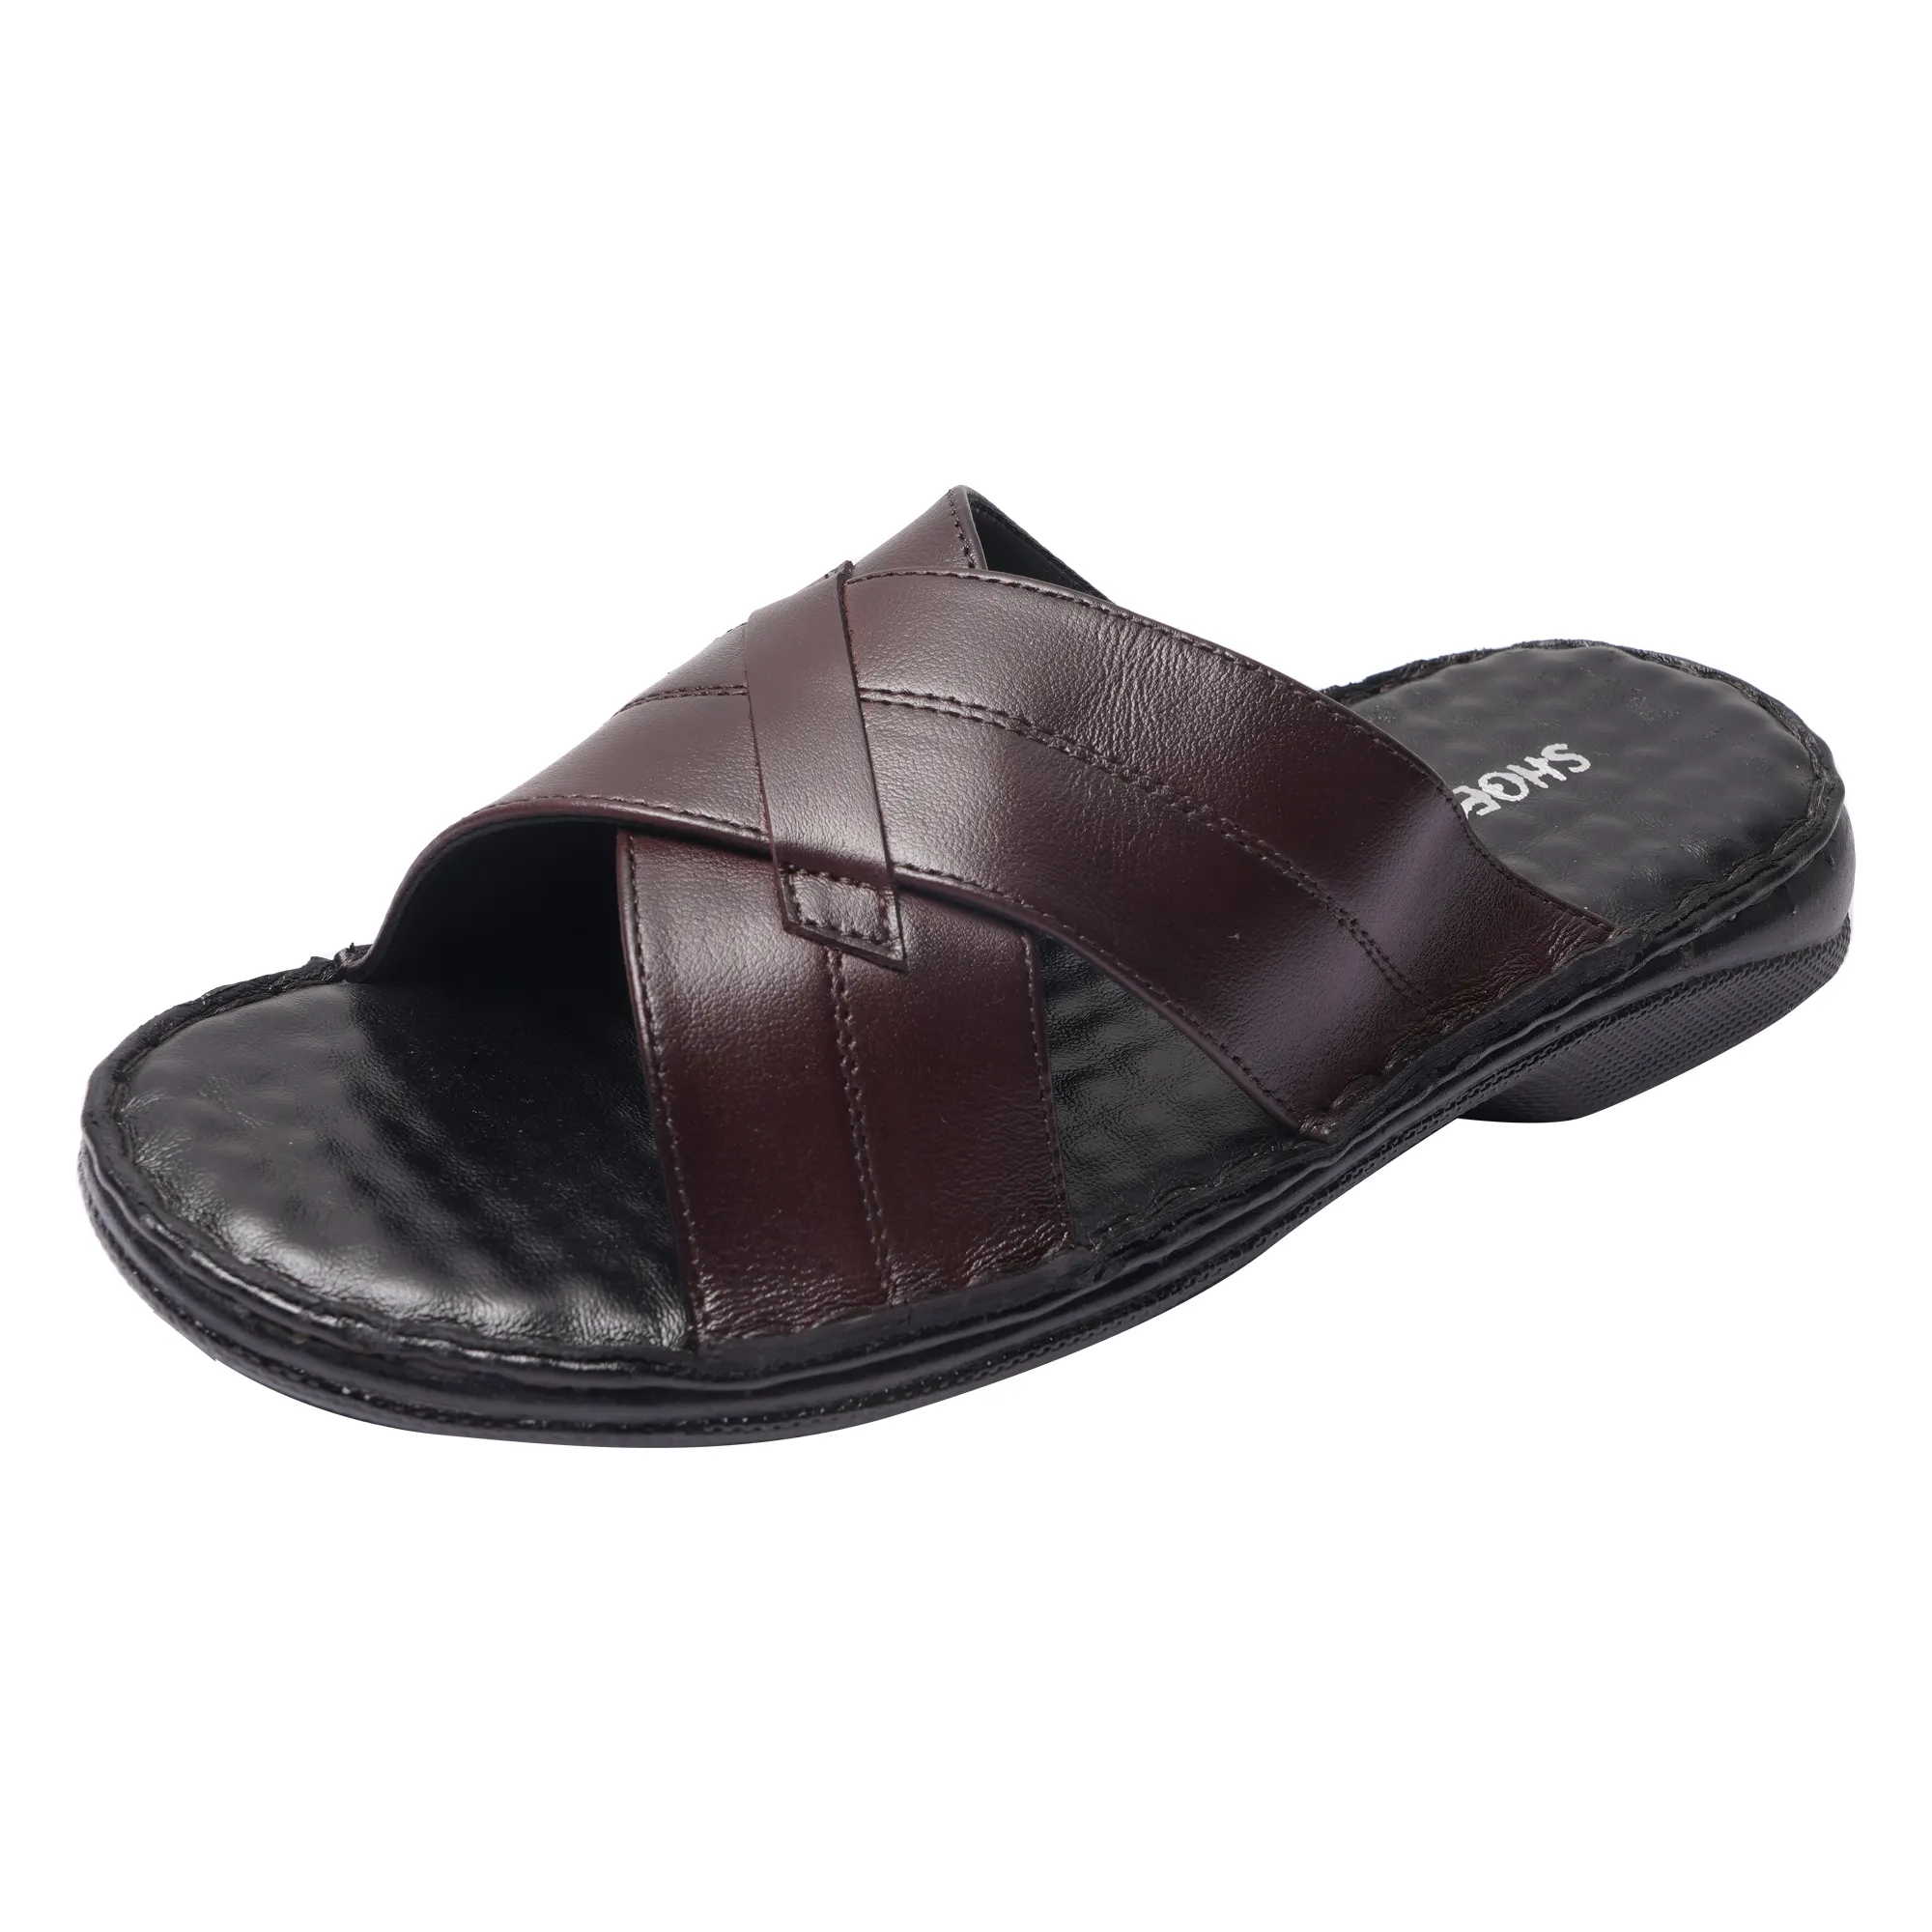 Emosis summer cowhide slippers non-slip soft bottom leather casual business men's slipper heavily cushioned sandals ESH012